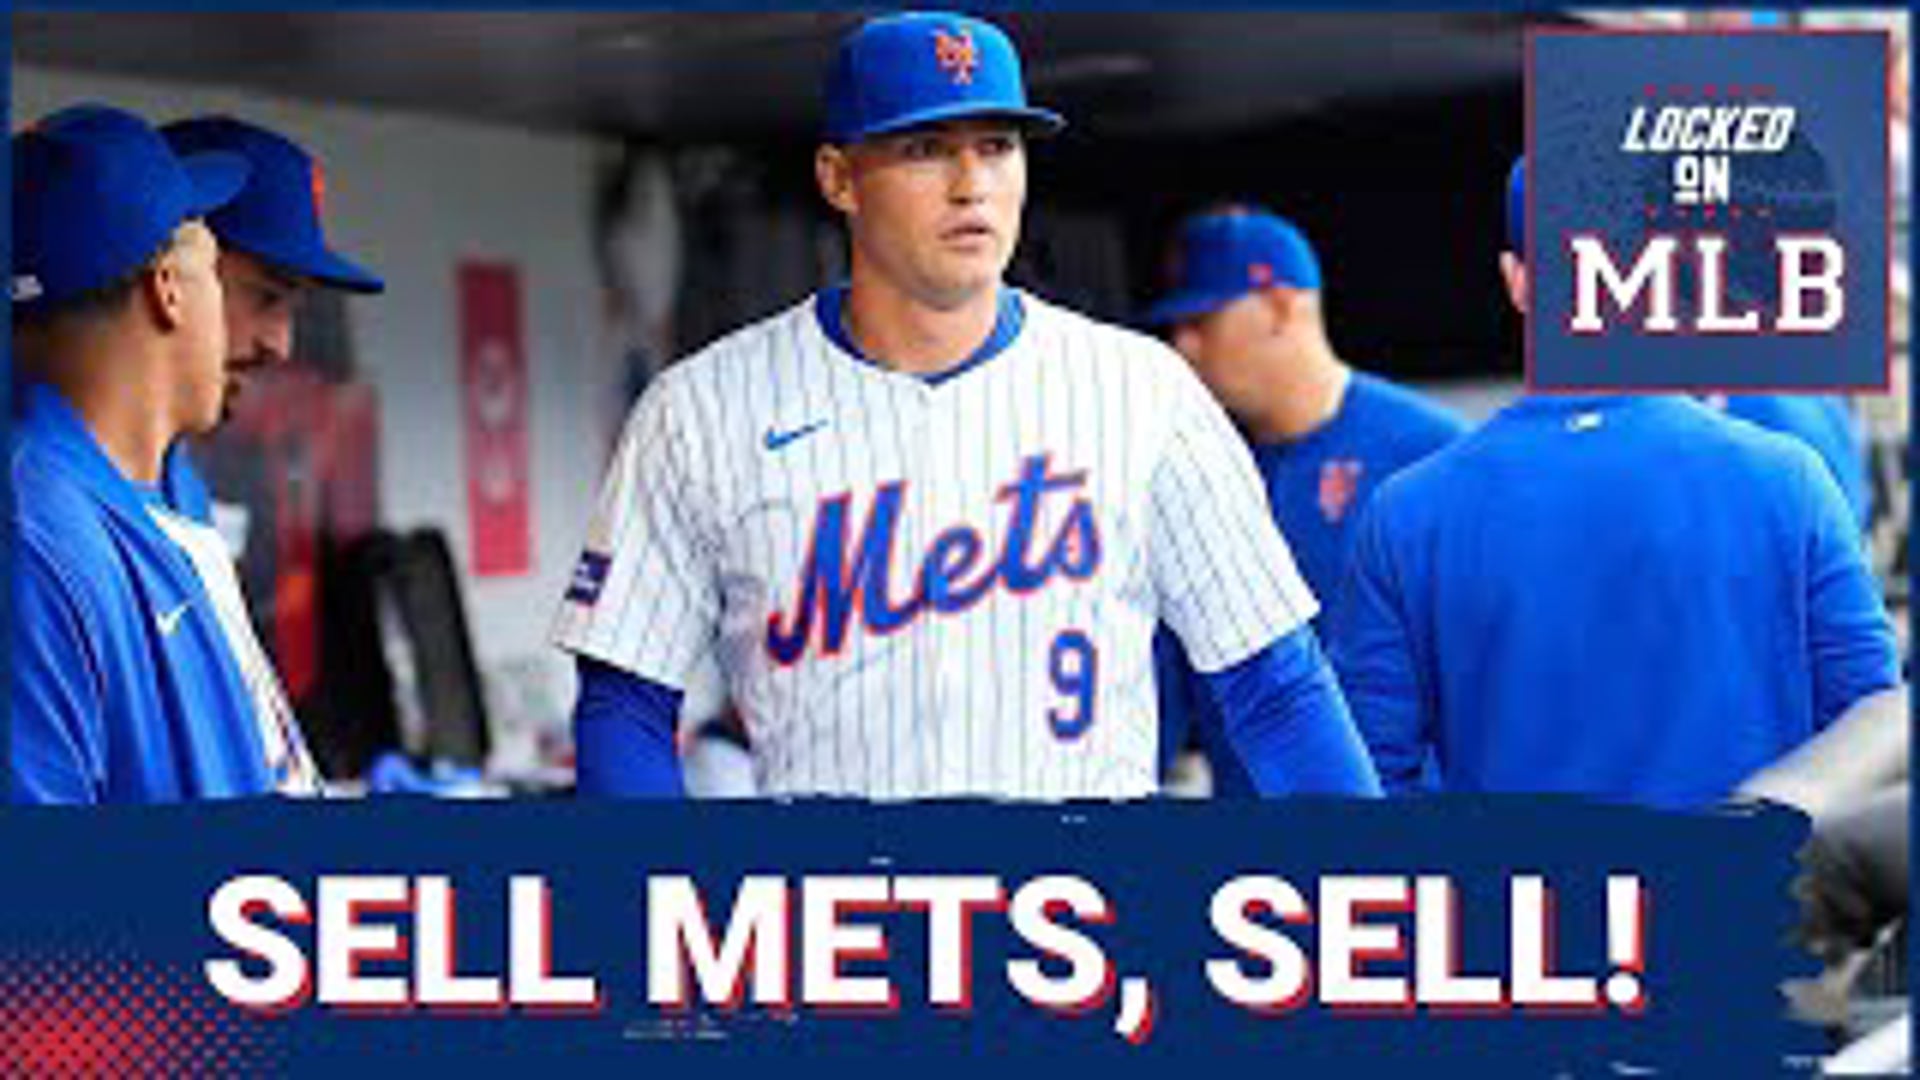 The Mets have trade chips in a sellers market. They should take advantage of that and flood their system with prospects.